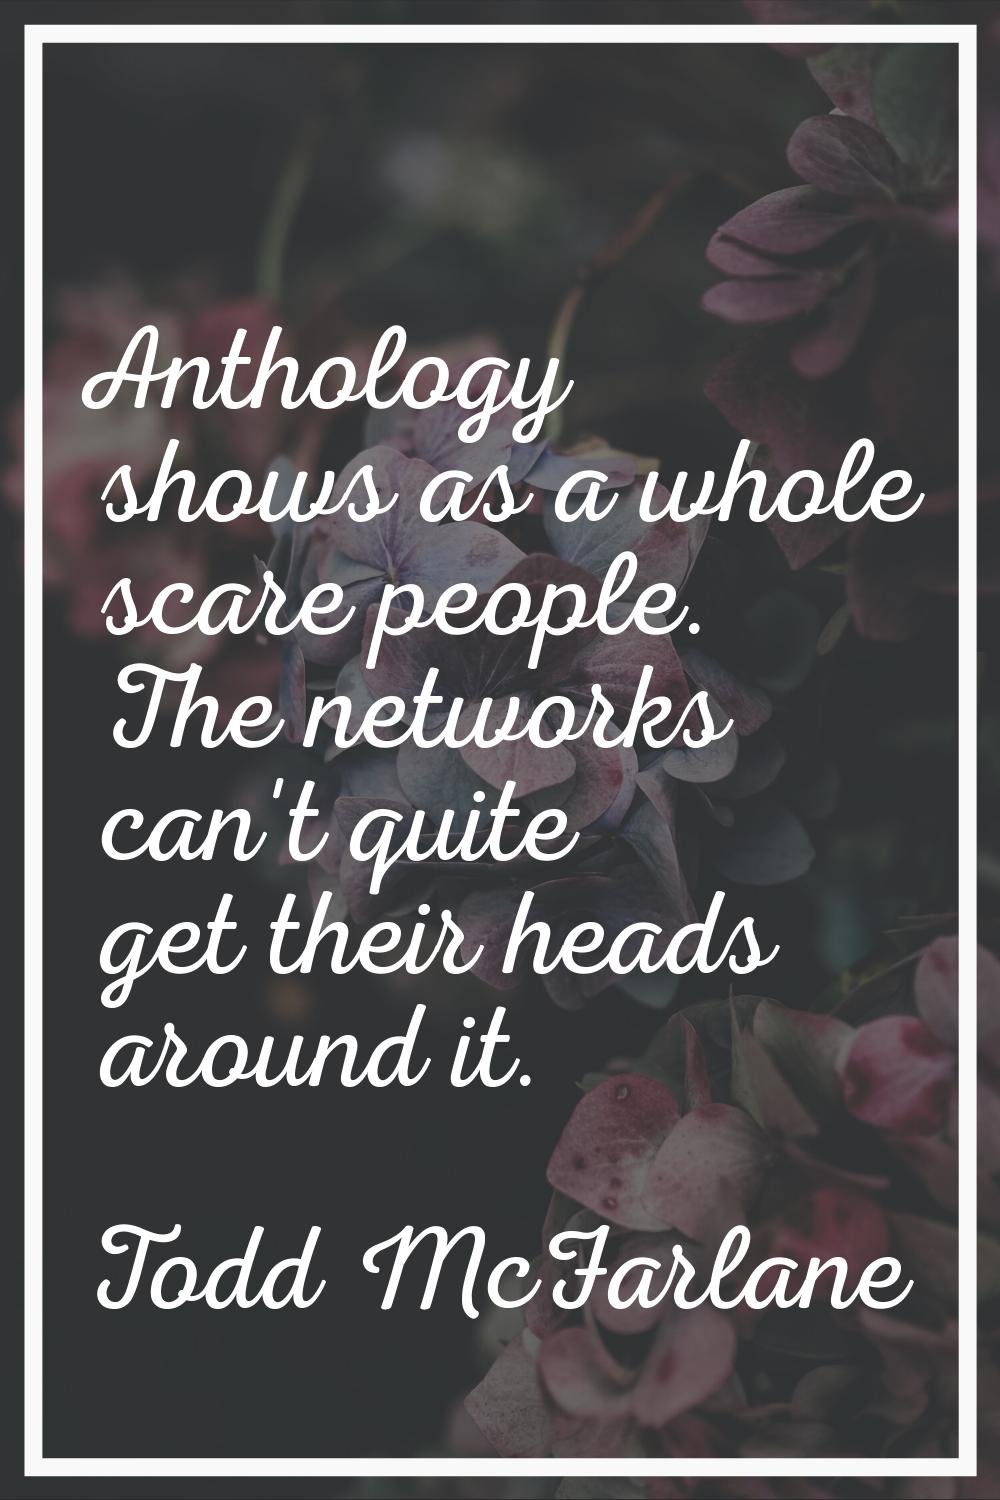 Anthology shows as a whole scare people. The networks can't quite get their heads around it.